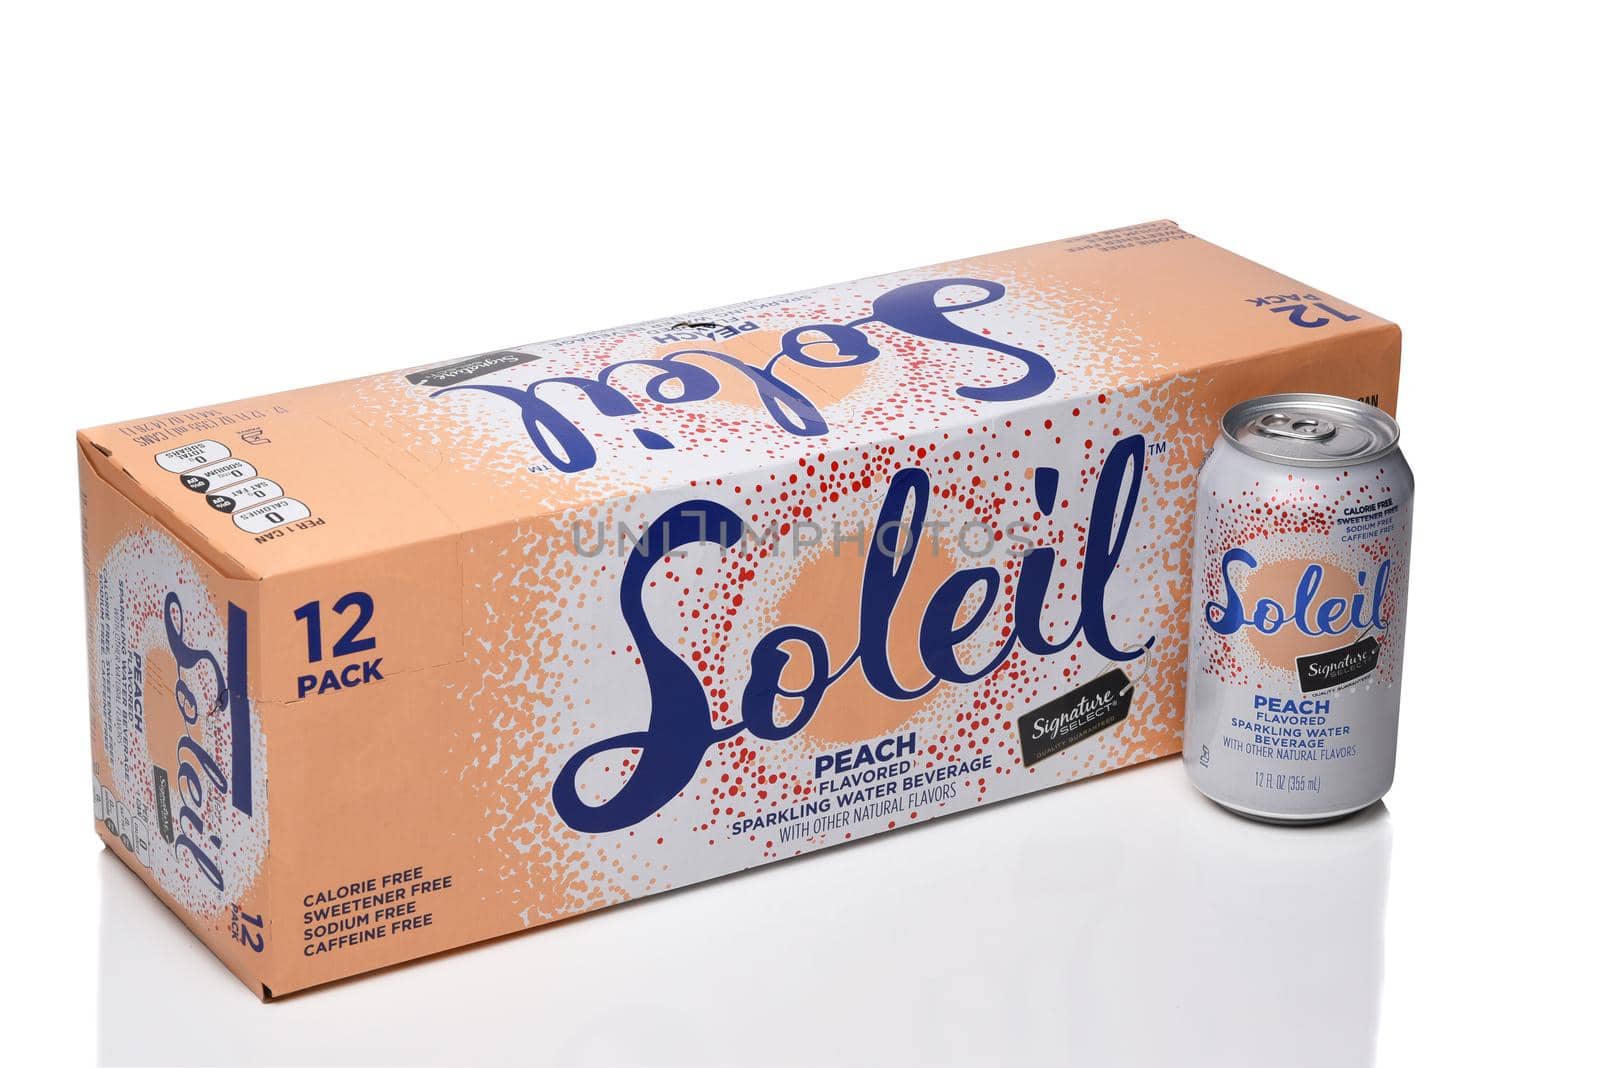 IRVINE, CALIFORNIA - 8 JUNE 2020: A 12 pack of Soleil Peach flavored Sparkling Water.  by sCukrov